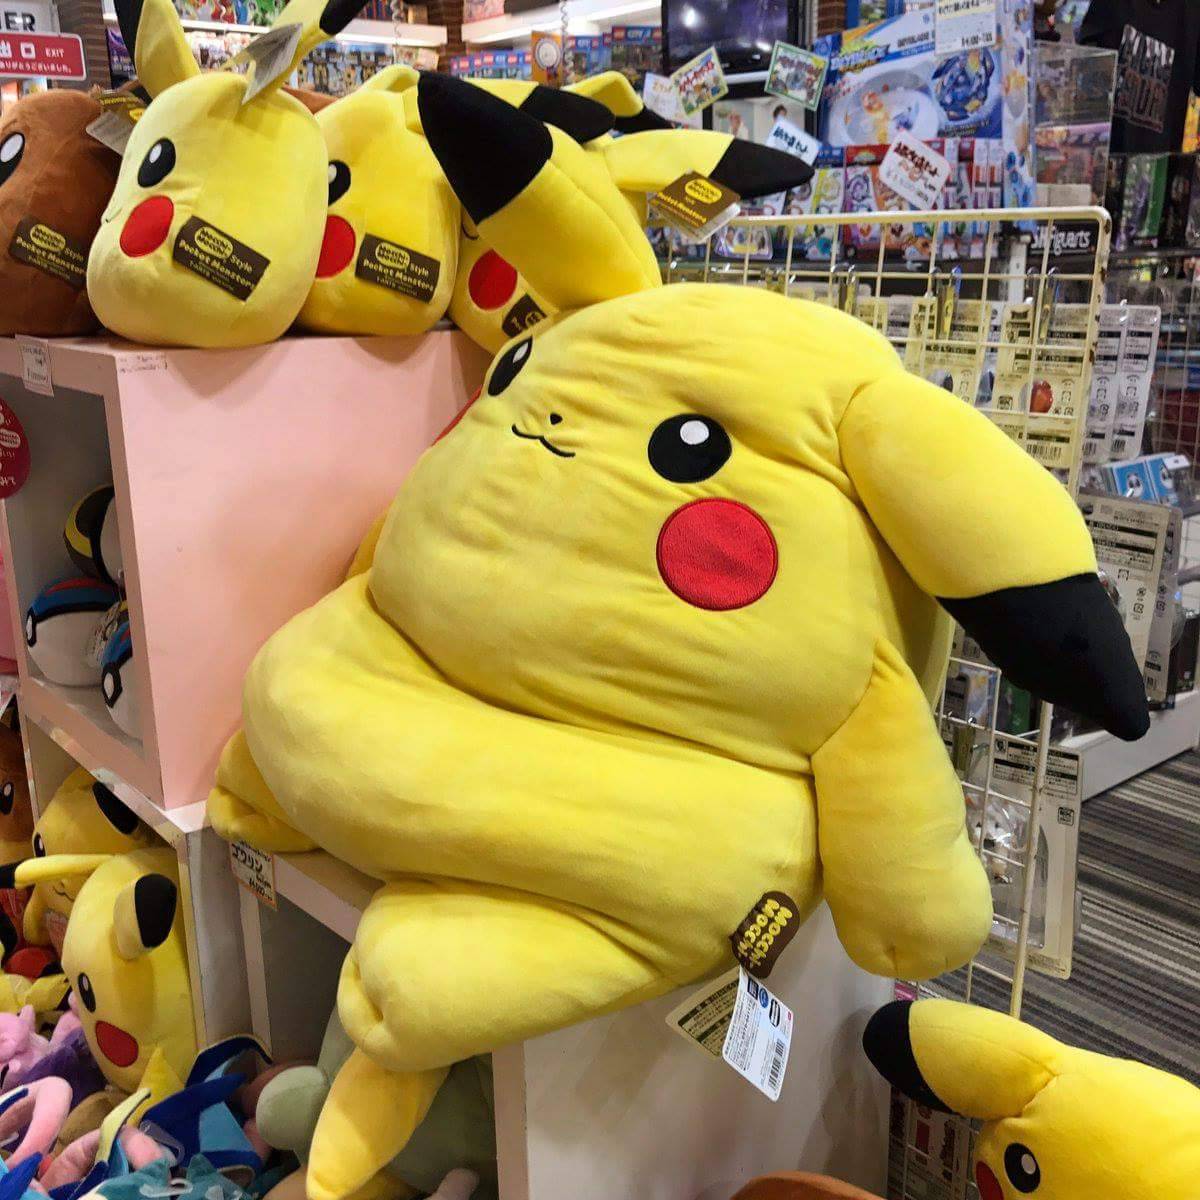 Man, Pikachu really let himself go with all that Ketchup…